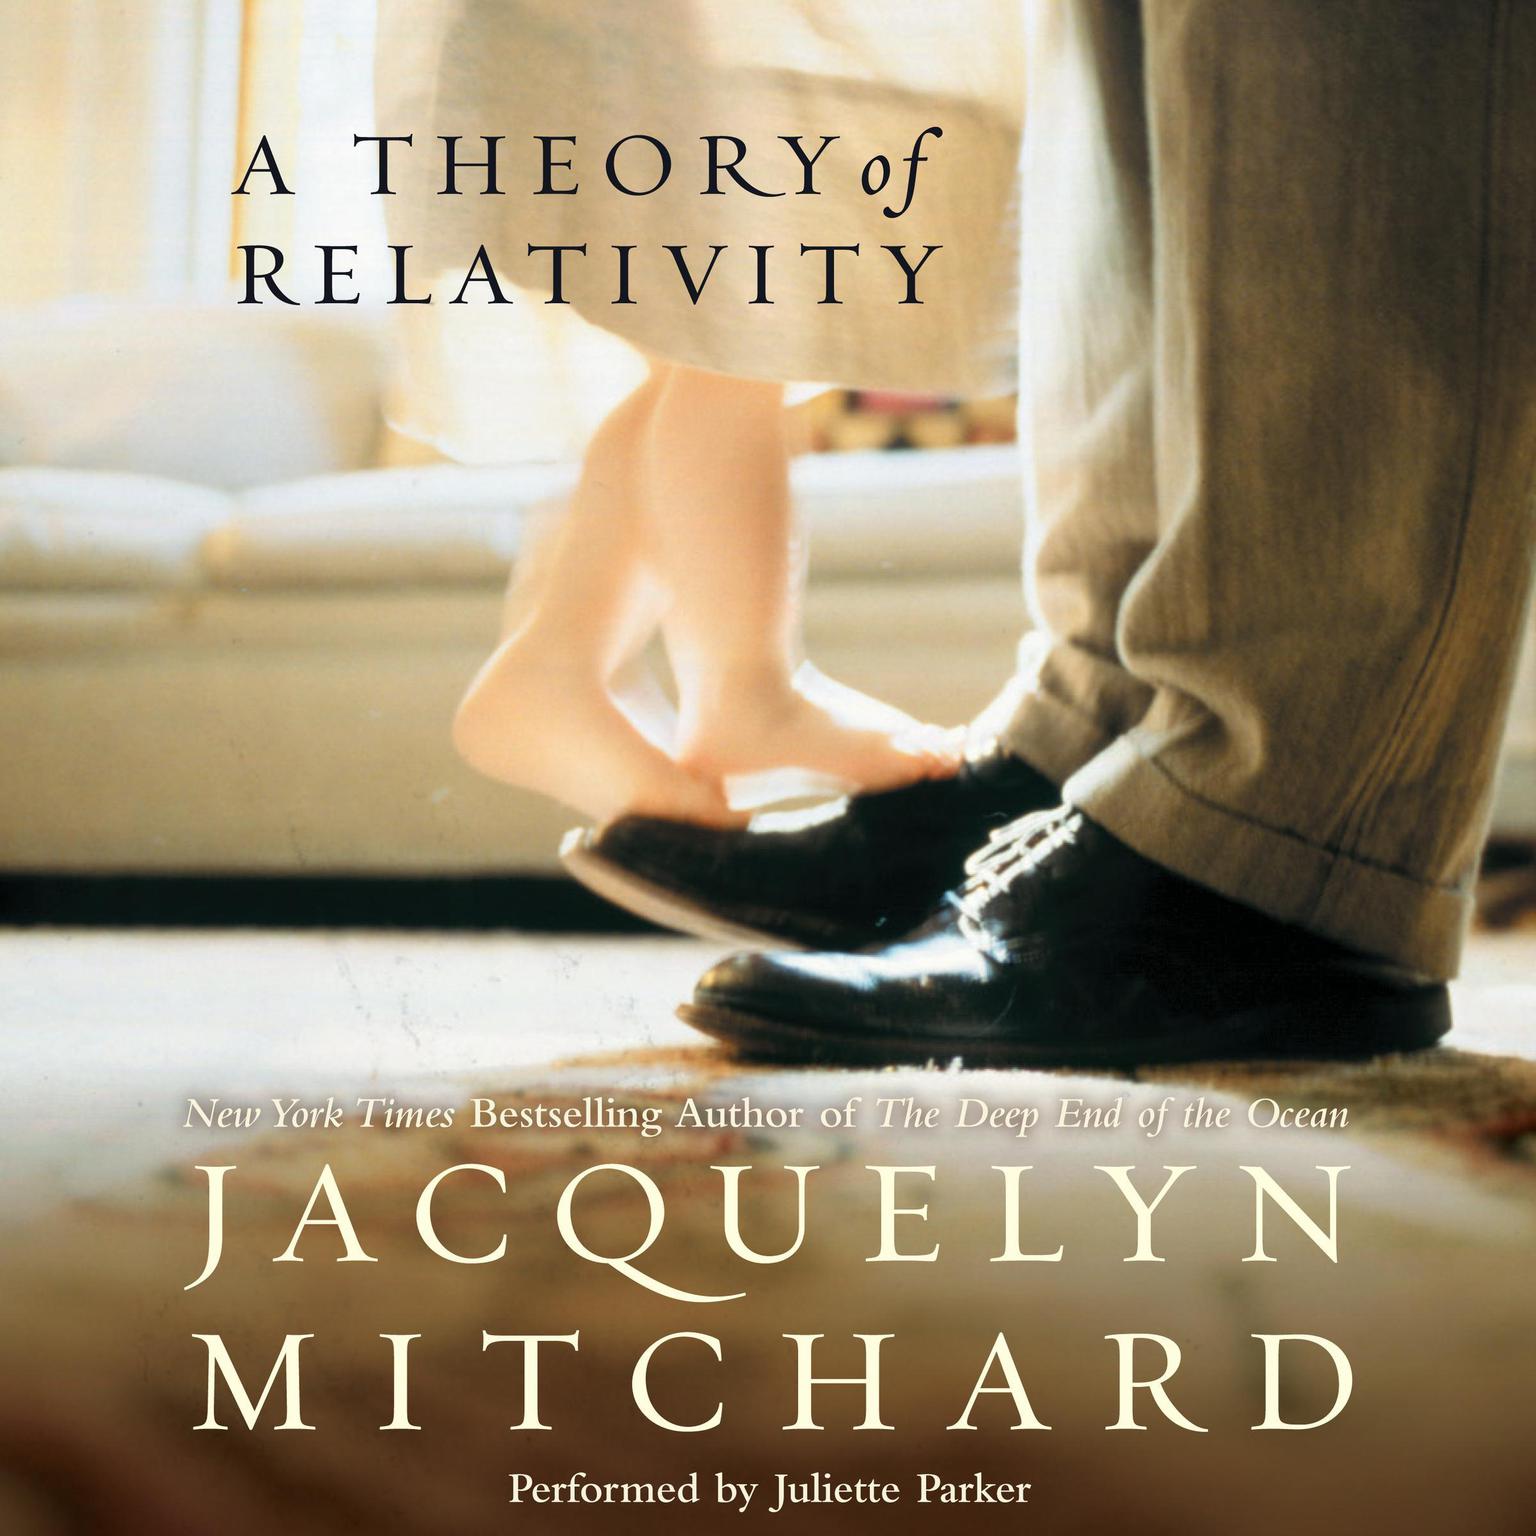 A Theory of Relativity Audiobook, by Jacquelyn Mitchard